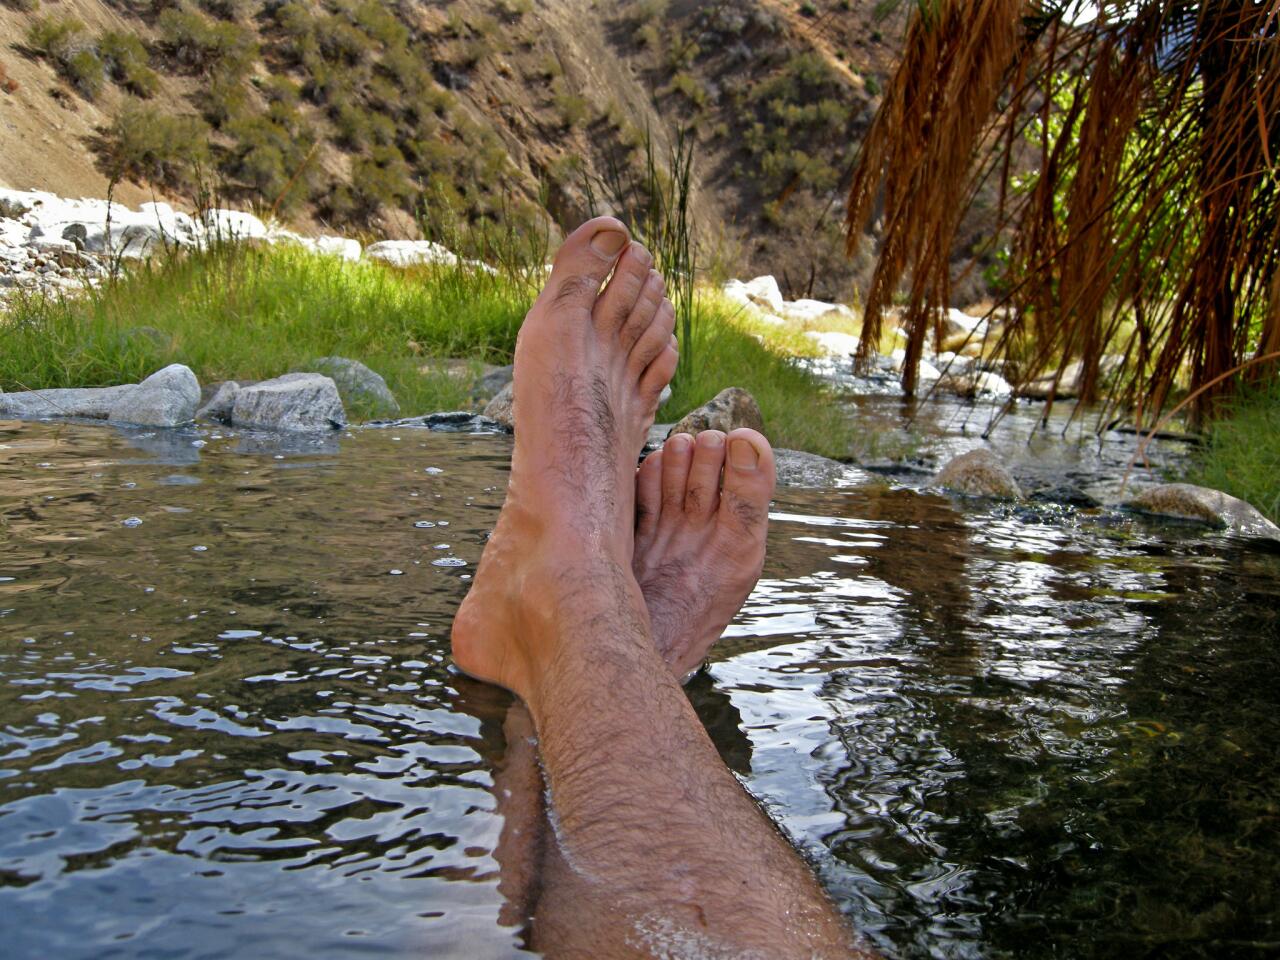 From the rock layer beneath the Los Padres National Forest, several hot springs bubble to the surface. But the Sespe Hot Springs, in the heart of the Sespe Wilderness, have a reputation among hikers as the hottest in Southern California.